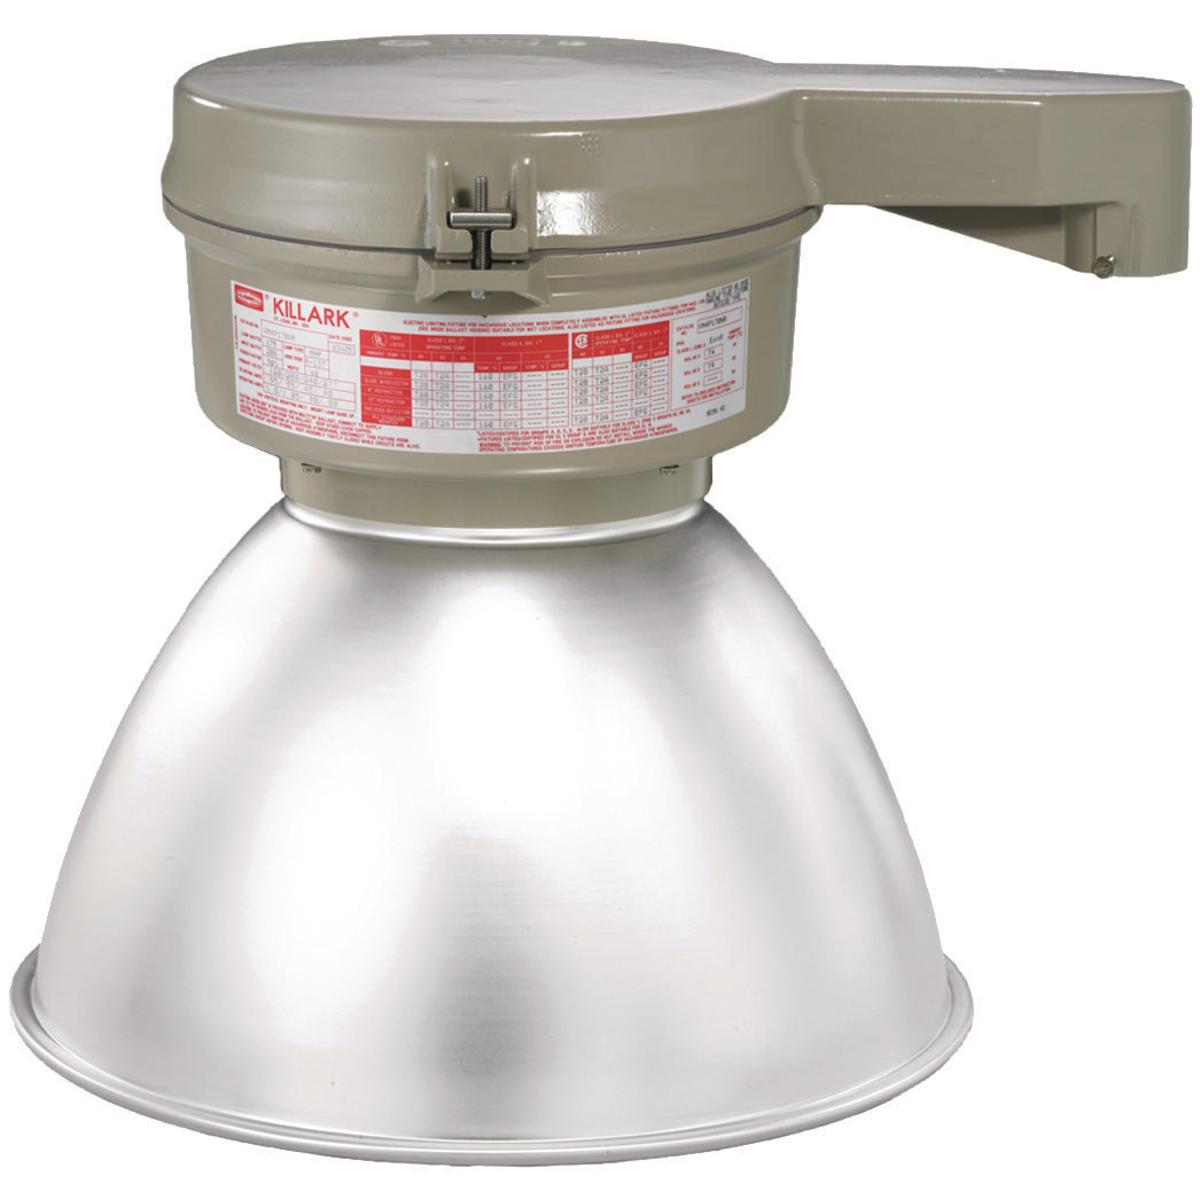 Hubbell VM4S150S5ERN VM4 Series - 150W High Pressure Sodium Quadri-Volt - 1-1/2" Stanchion Mount - Enclosed Reflector  ; Ballast tank and splice box – corrosion resistant copper-free aluminum alloy with baked powder epoxy/polyester finish, electrostatically applied for comple